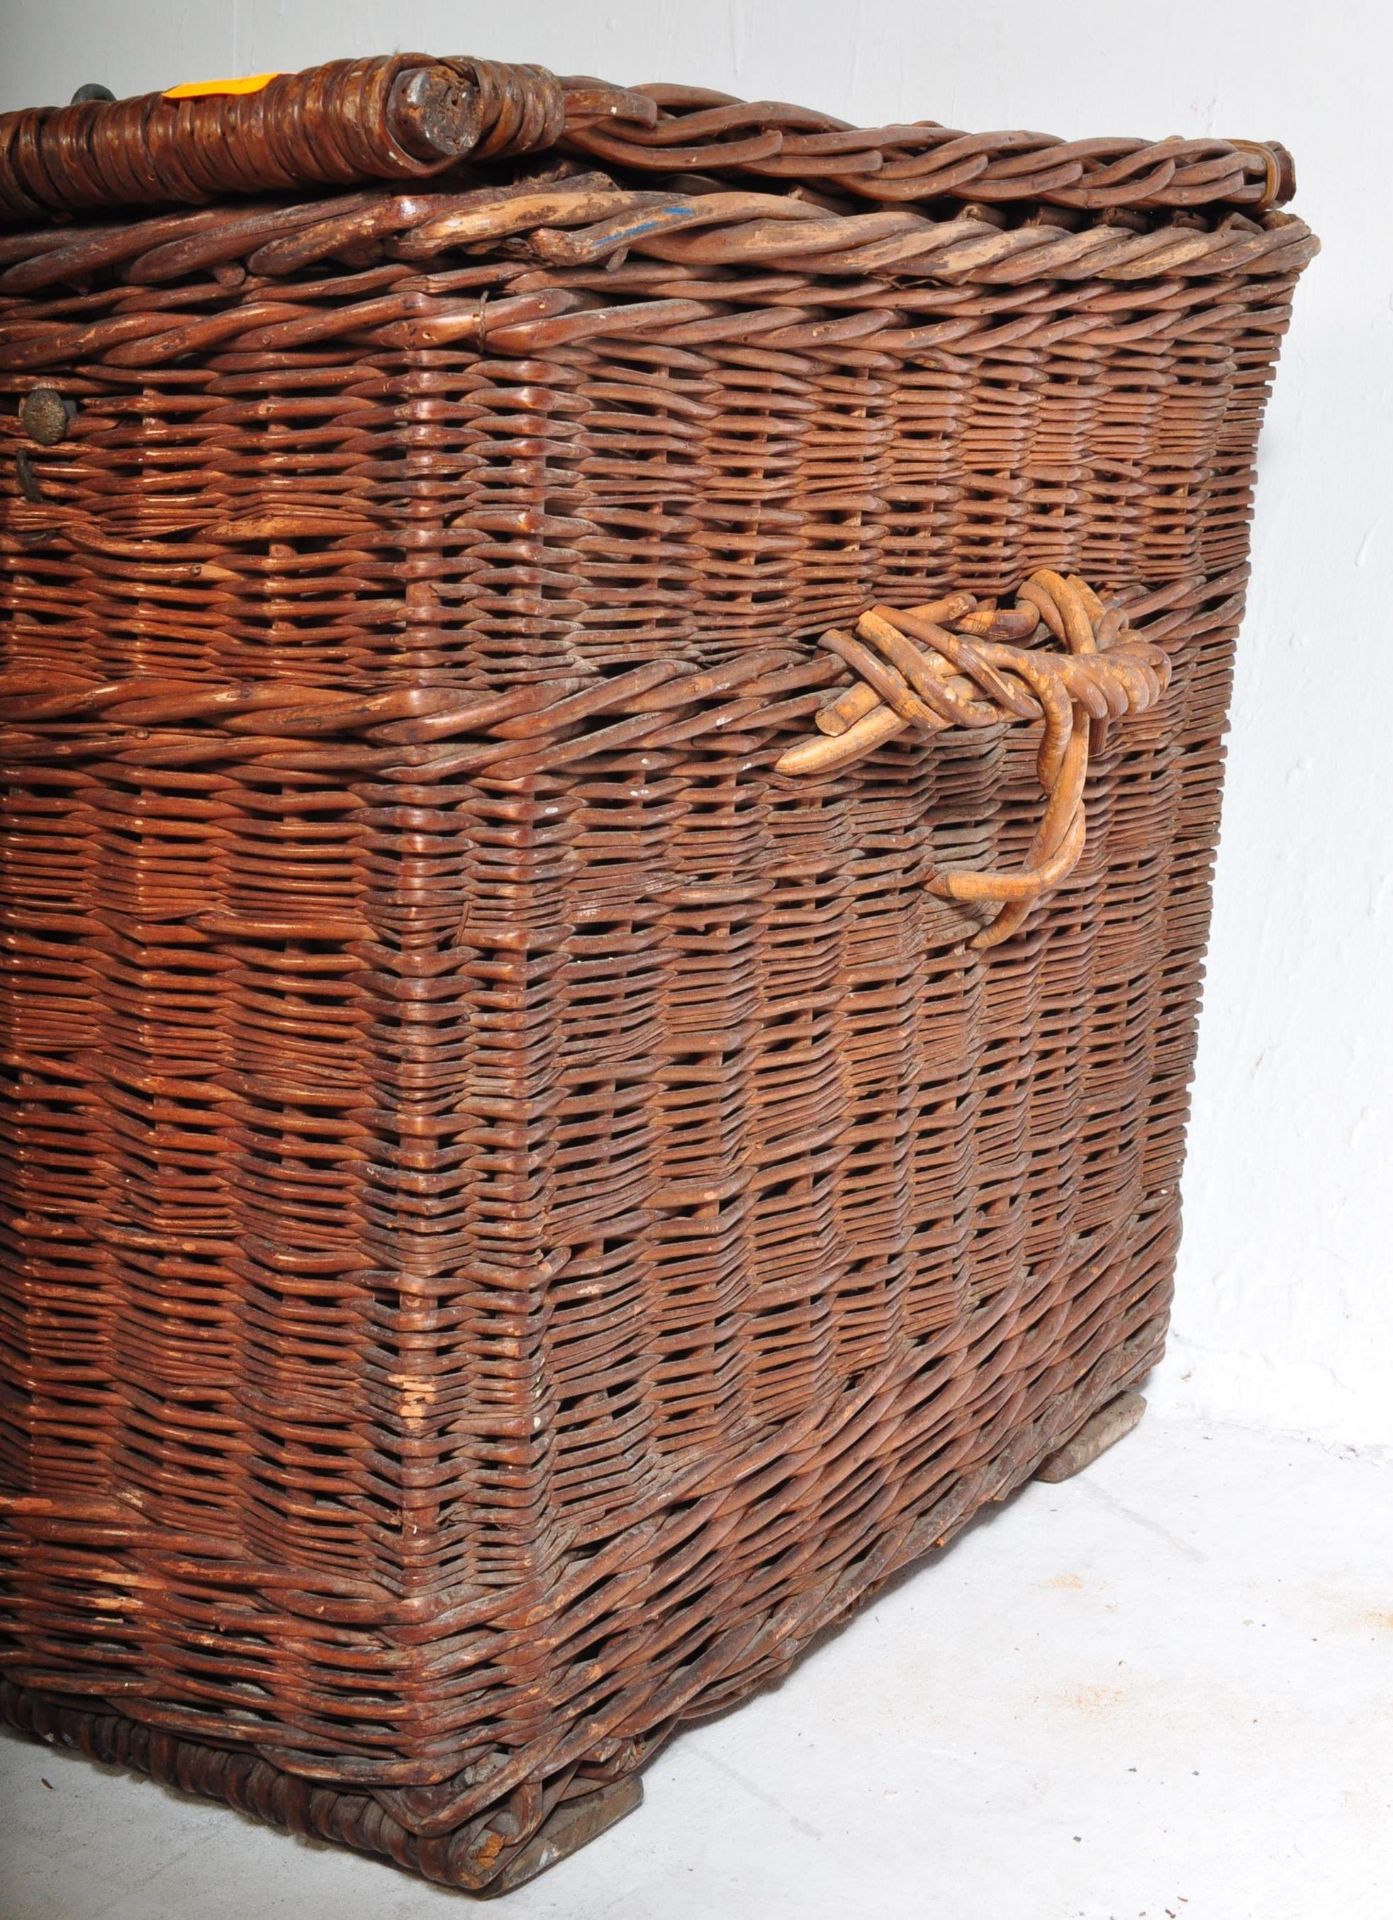 LARGE EARLY 20TH CENTURY WICKER LAUNDRY BASKET - Image 3 of 5